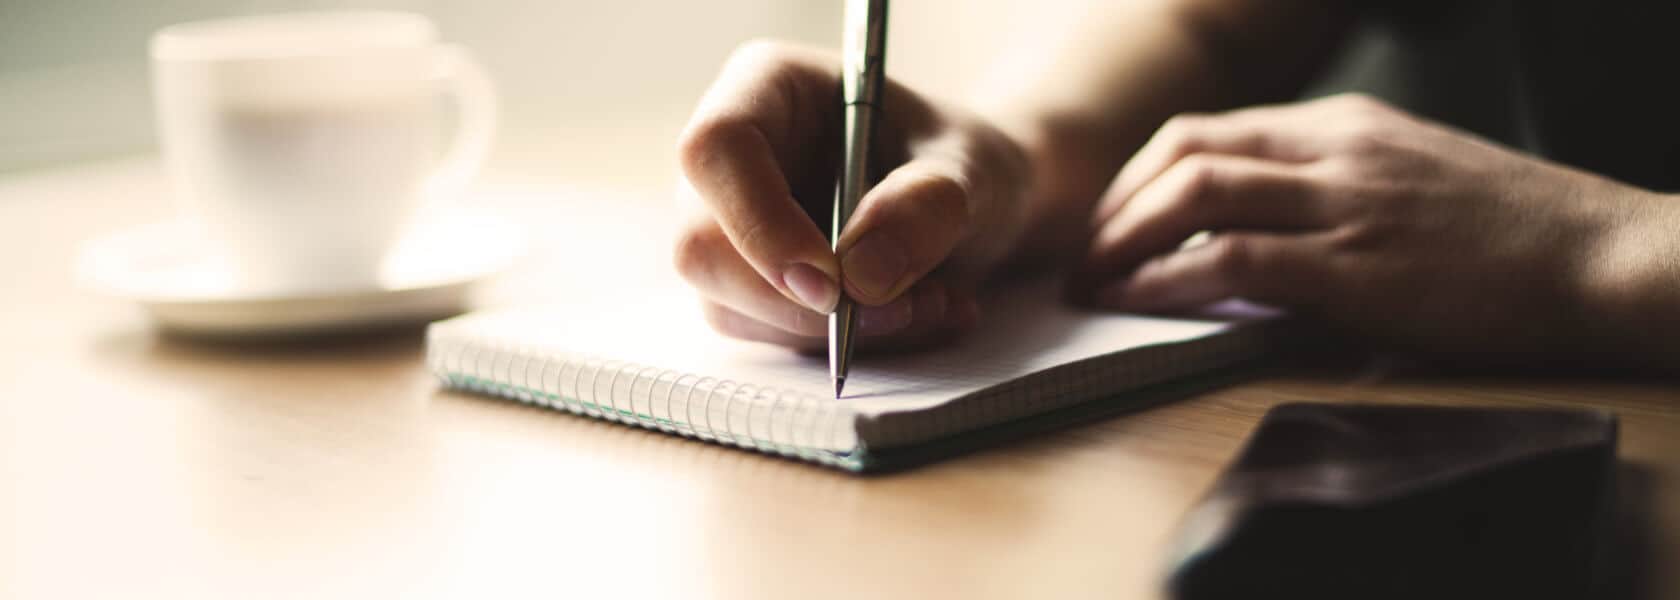 How Can Journaling Help Improve Our Mental Health